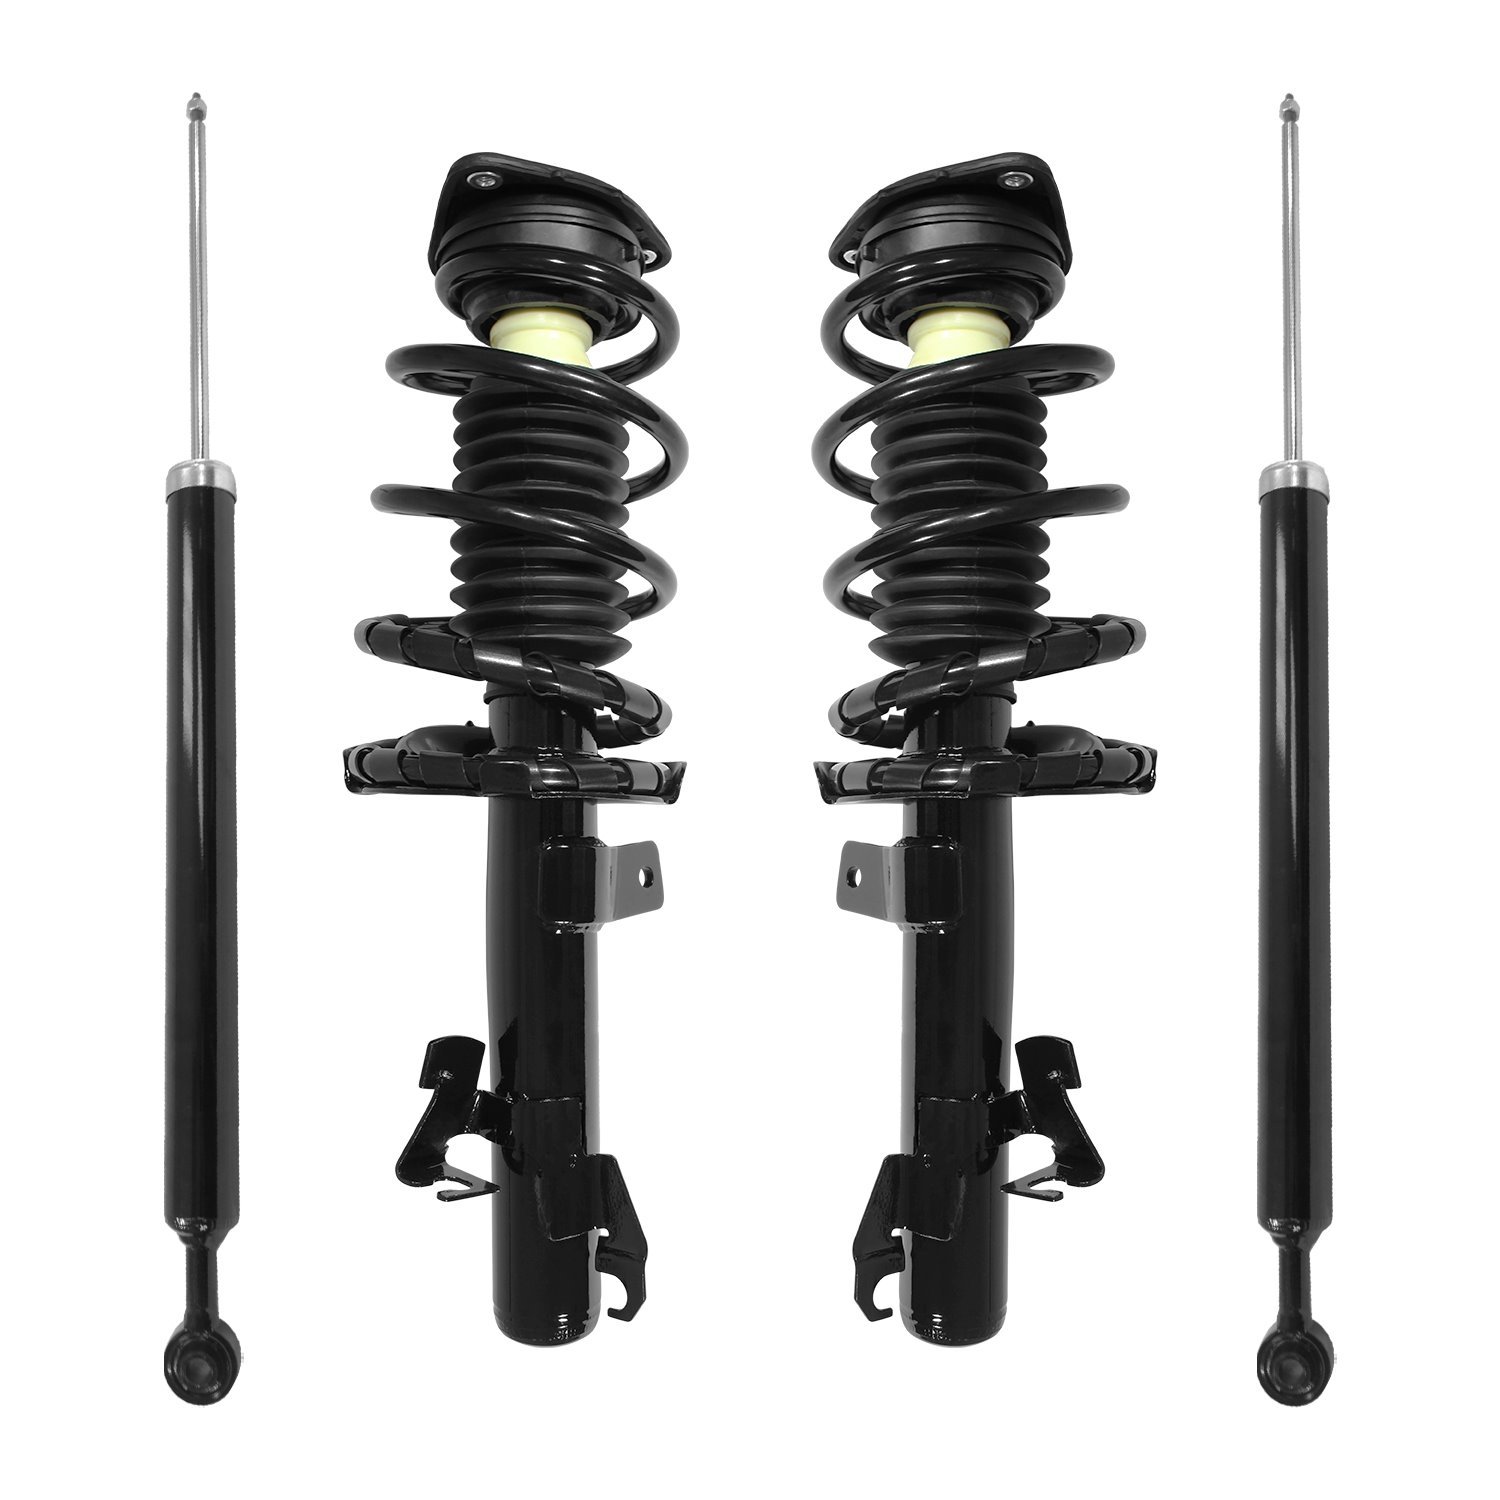 4-11681-259210-001 Front & Rear Suspension Strut & Coil Spring Assembly Fits Select Mazda 3